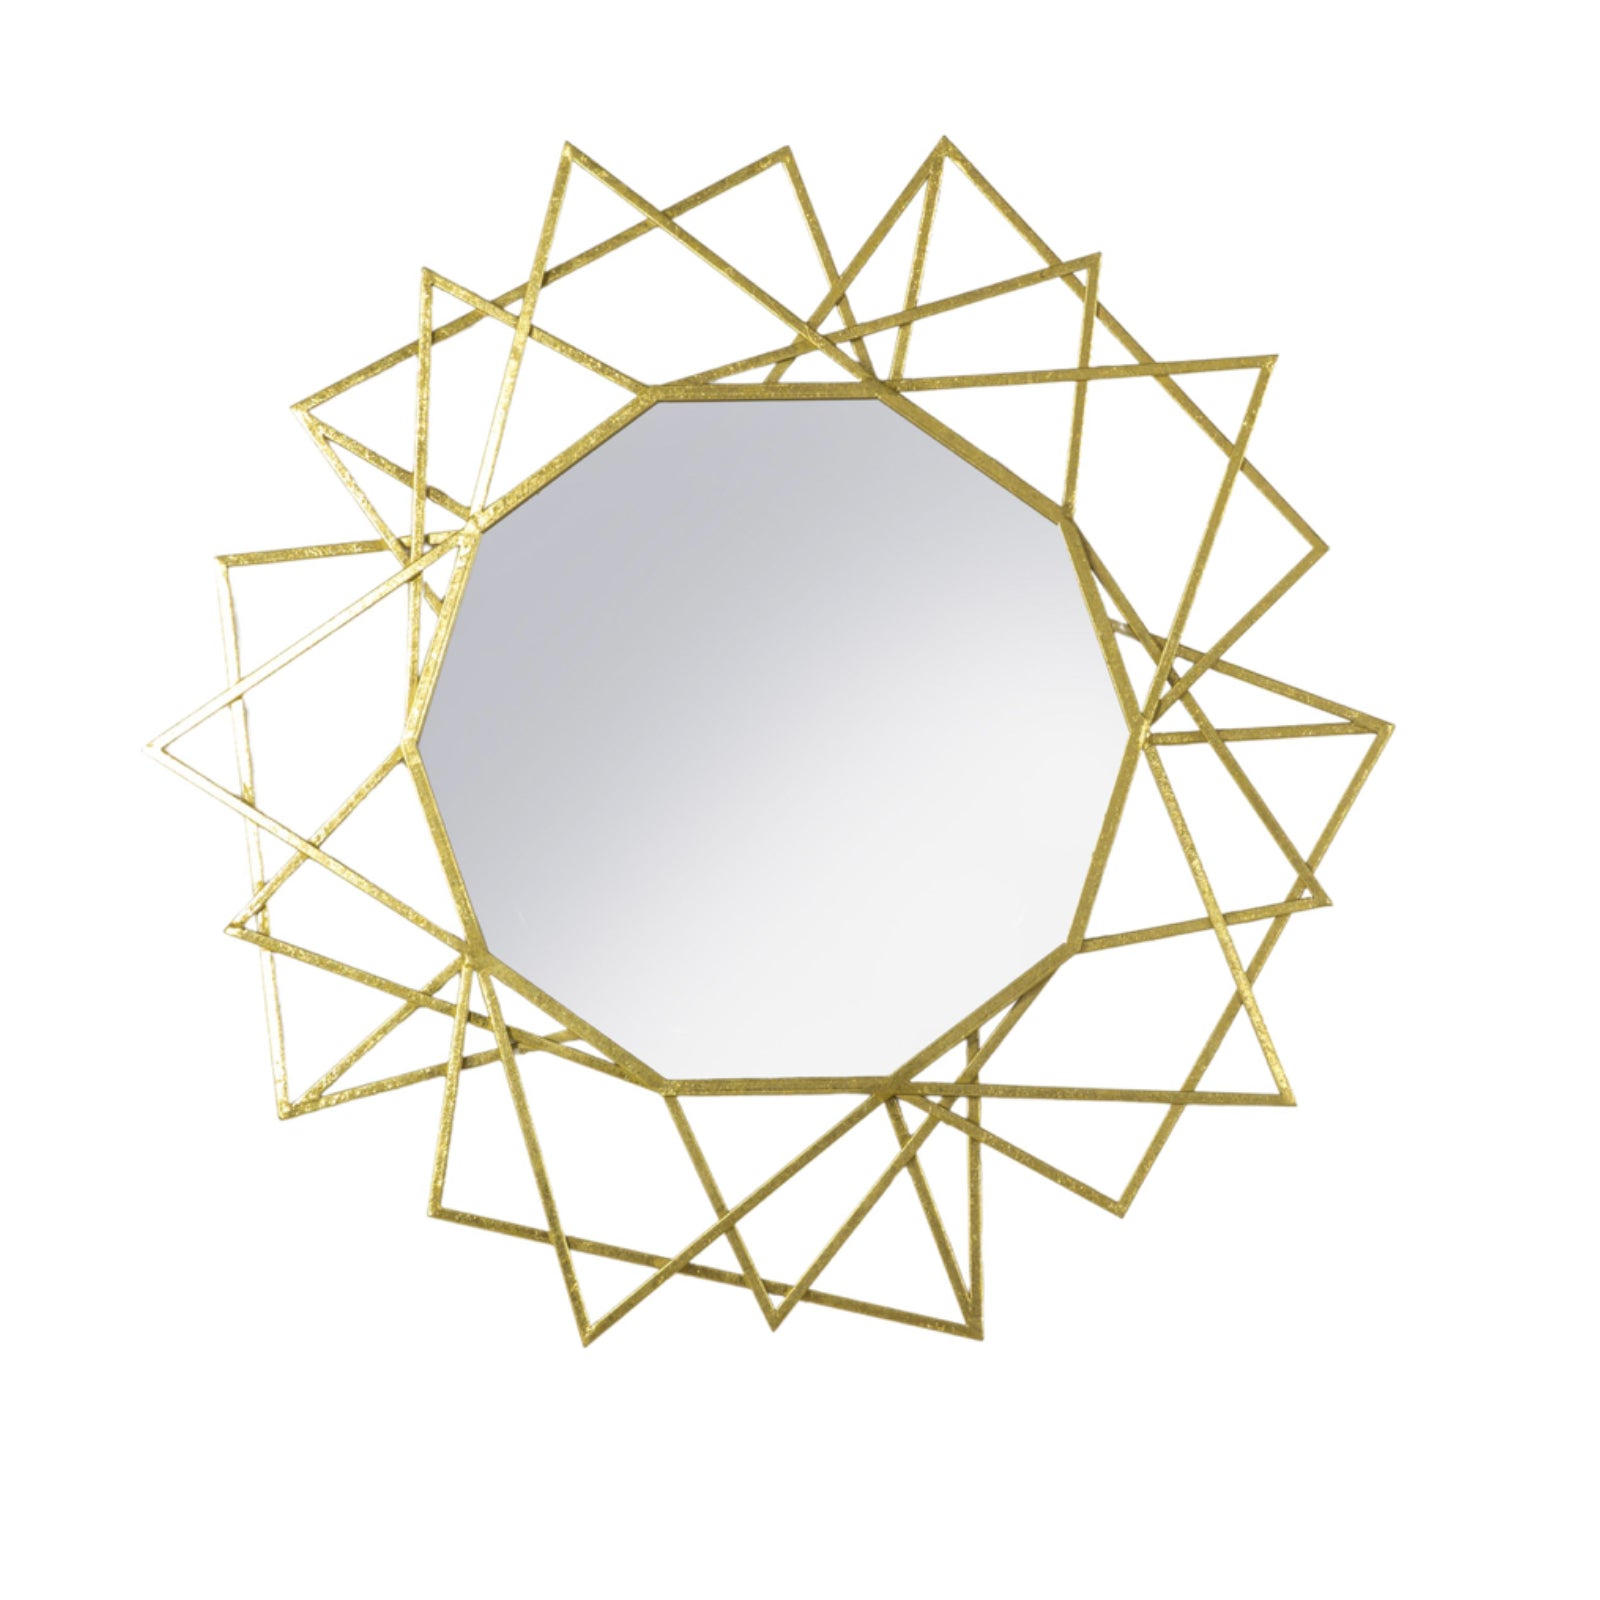 Antique Gold Geometric Round Mirror - The Farthing